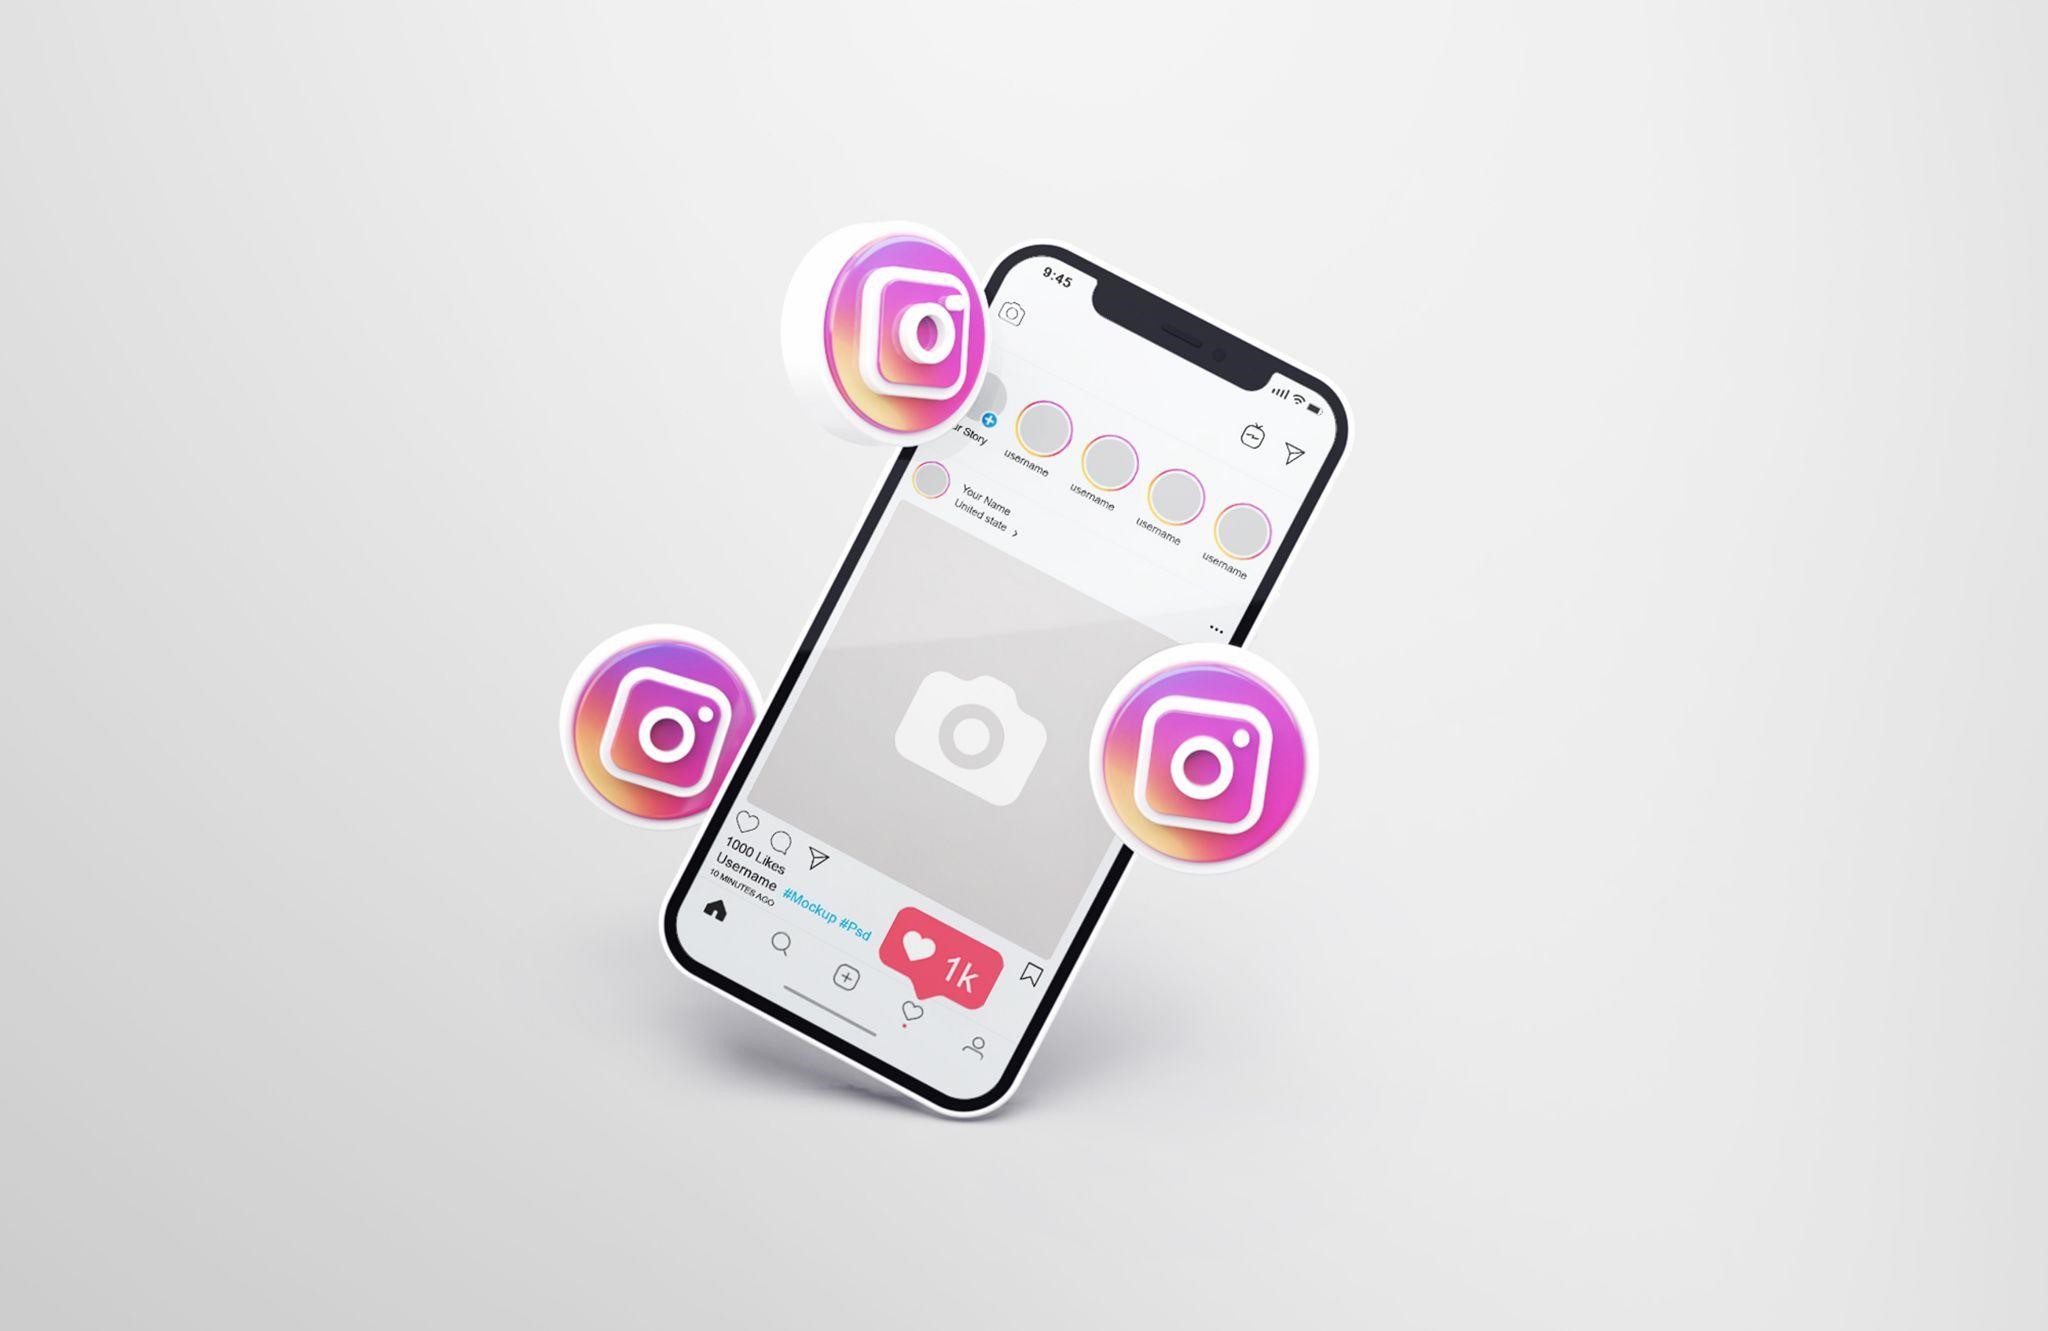 indian instagram followers buy, indian instagram followers, instagram followers buy, instagram followers indian, buy instagram followers indian, buy indian instagram followers, buy instagram followers, instagram followers, Indian instagram followers buy in india